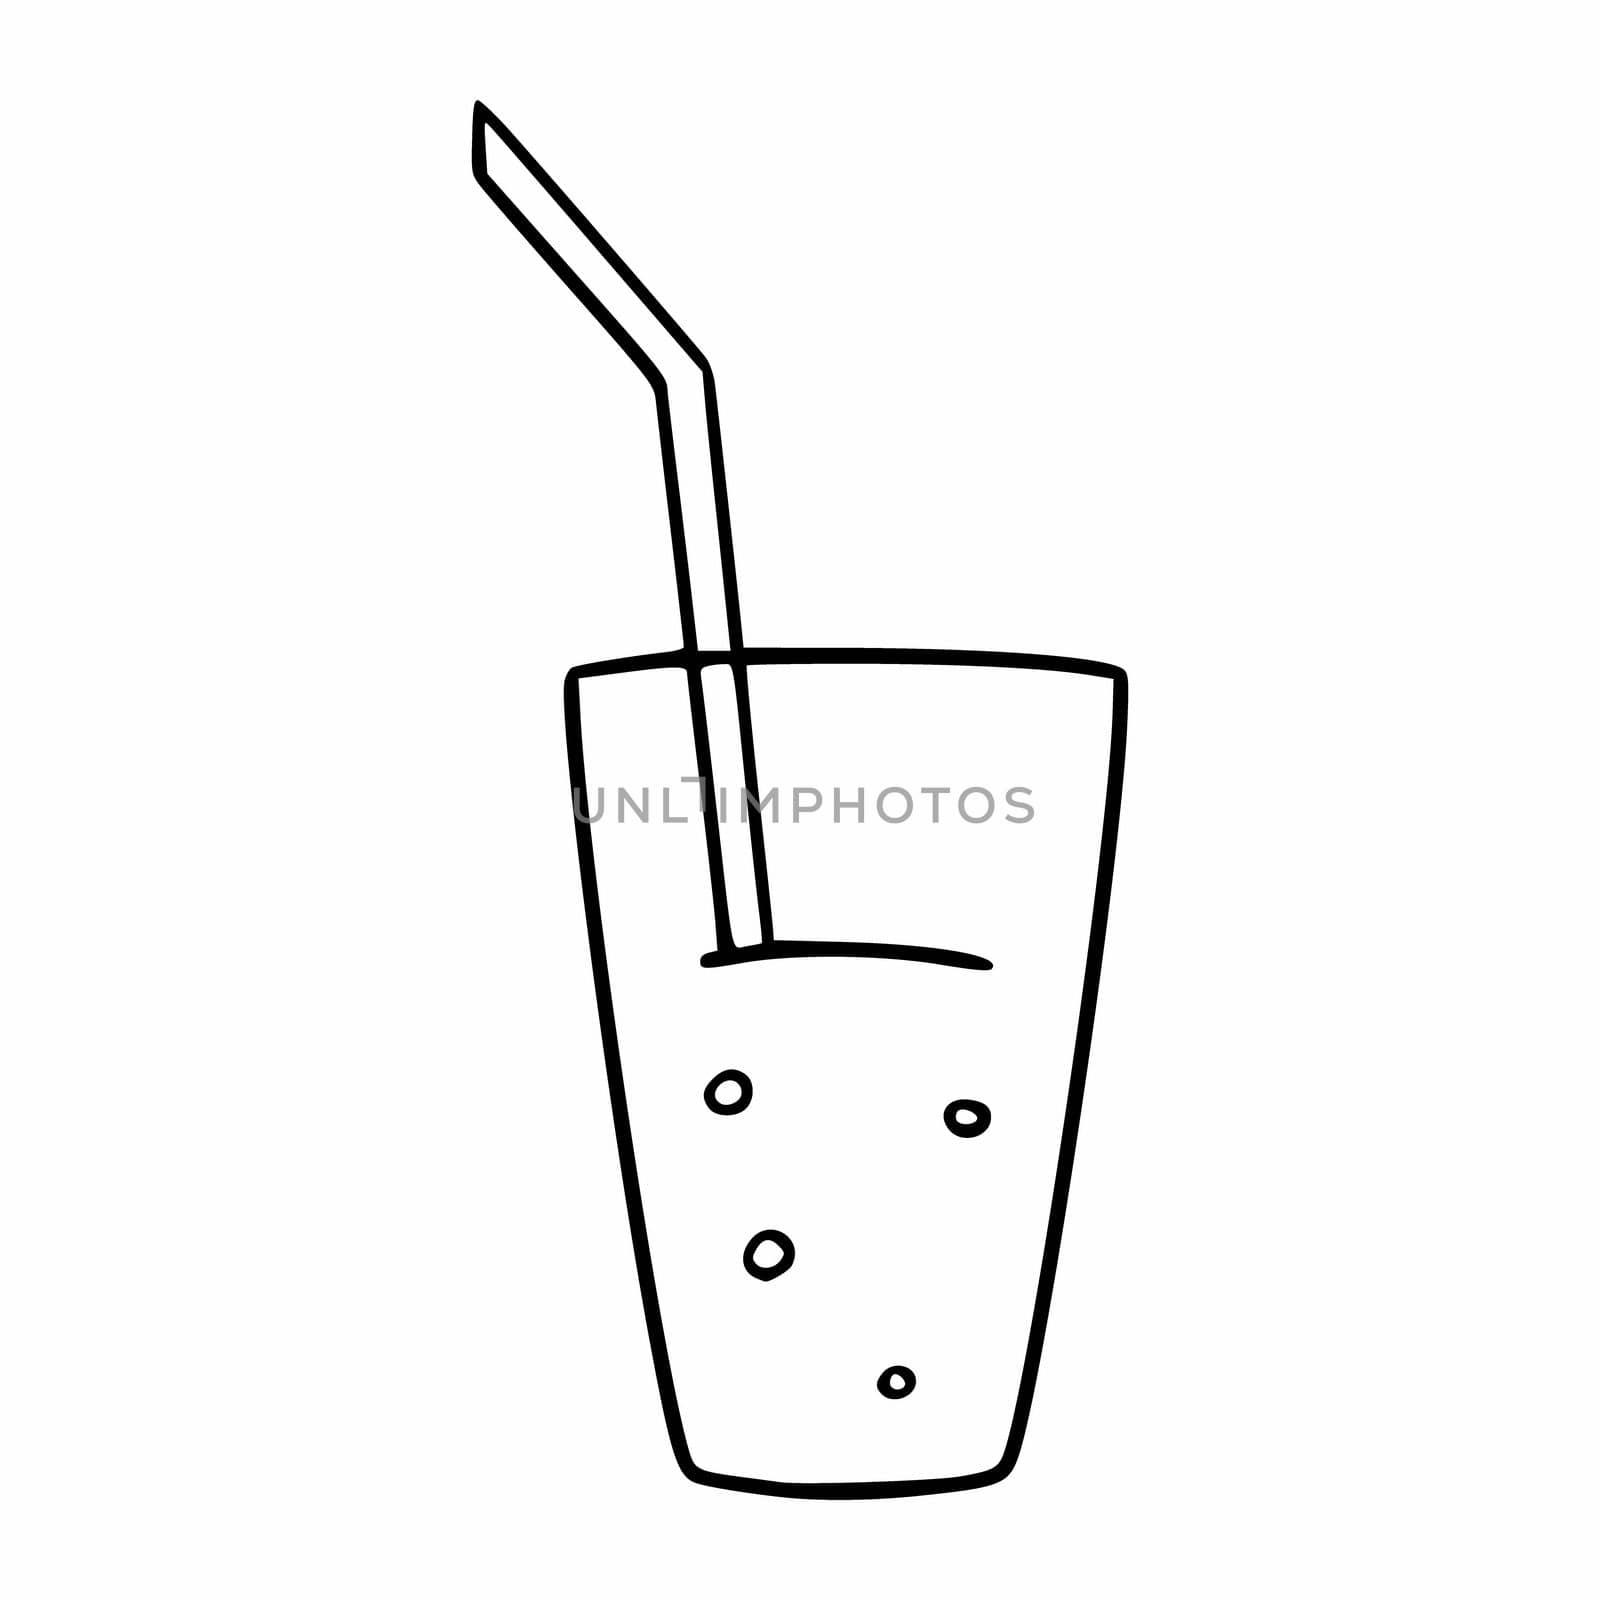 Cocktail with a straw. A cold drink in a glass. Vector icon in doodle style.